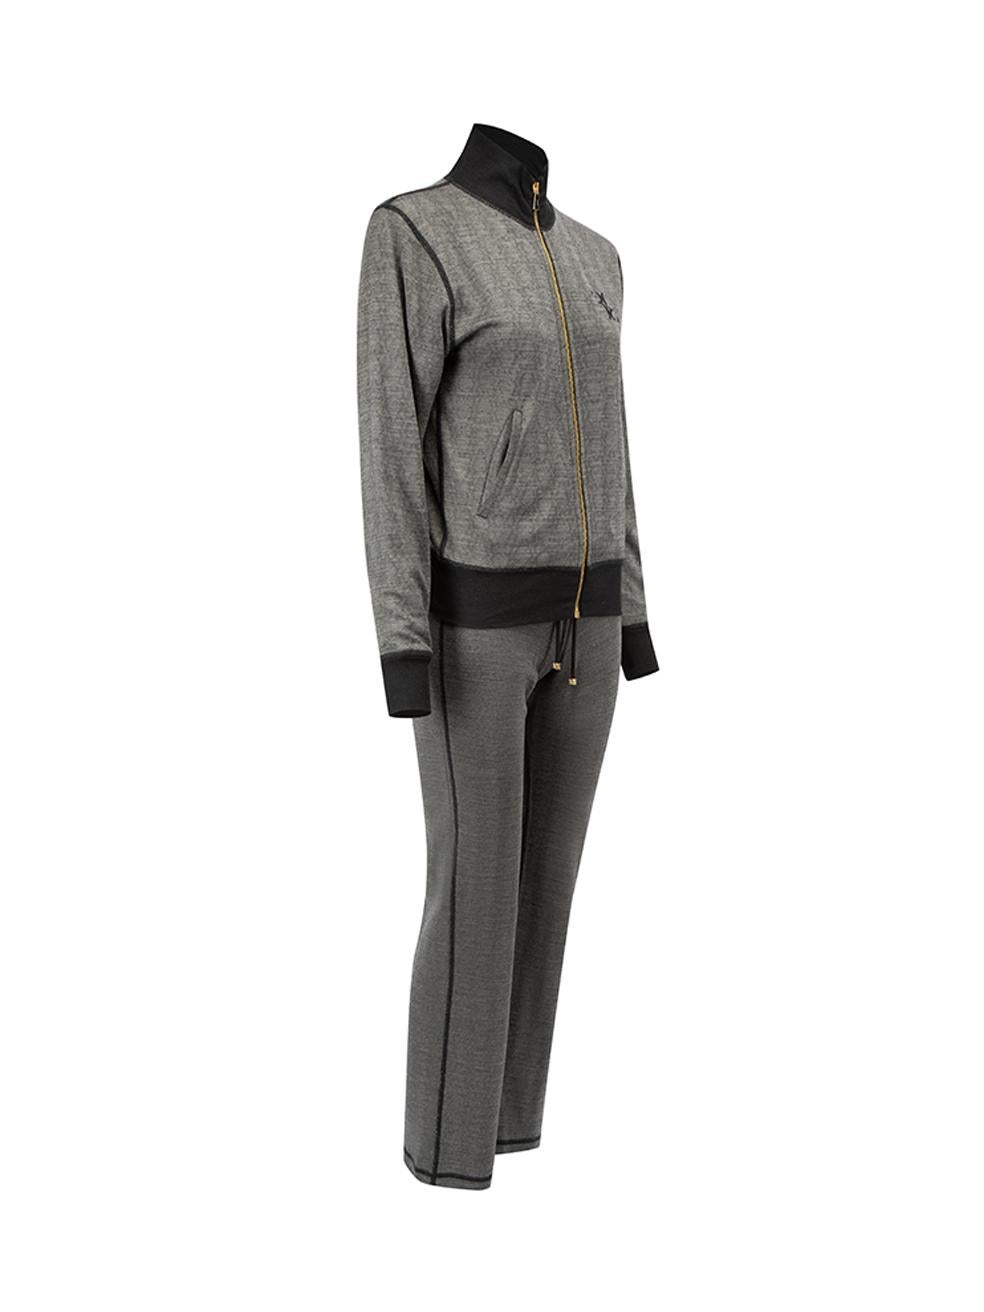 CONDITION is Very good. Minimal wear to set is evident. Minimal wear to outer fabric and pulls to thread can be seen on the zip up jacket on this used Billionaire designer resale item. 
 
 Details
  Grey
 Silk
 Tracksuit set
 Long sleeves track